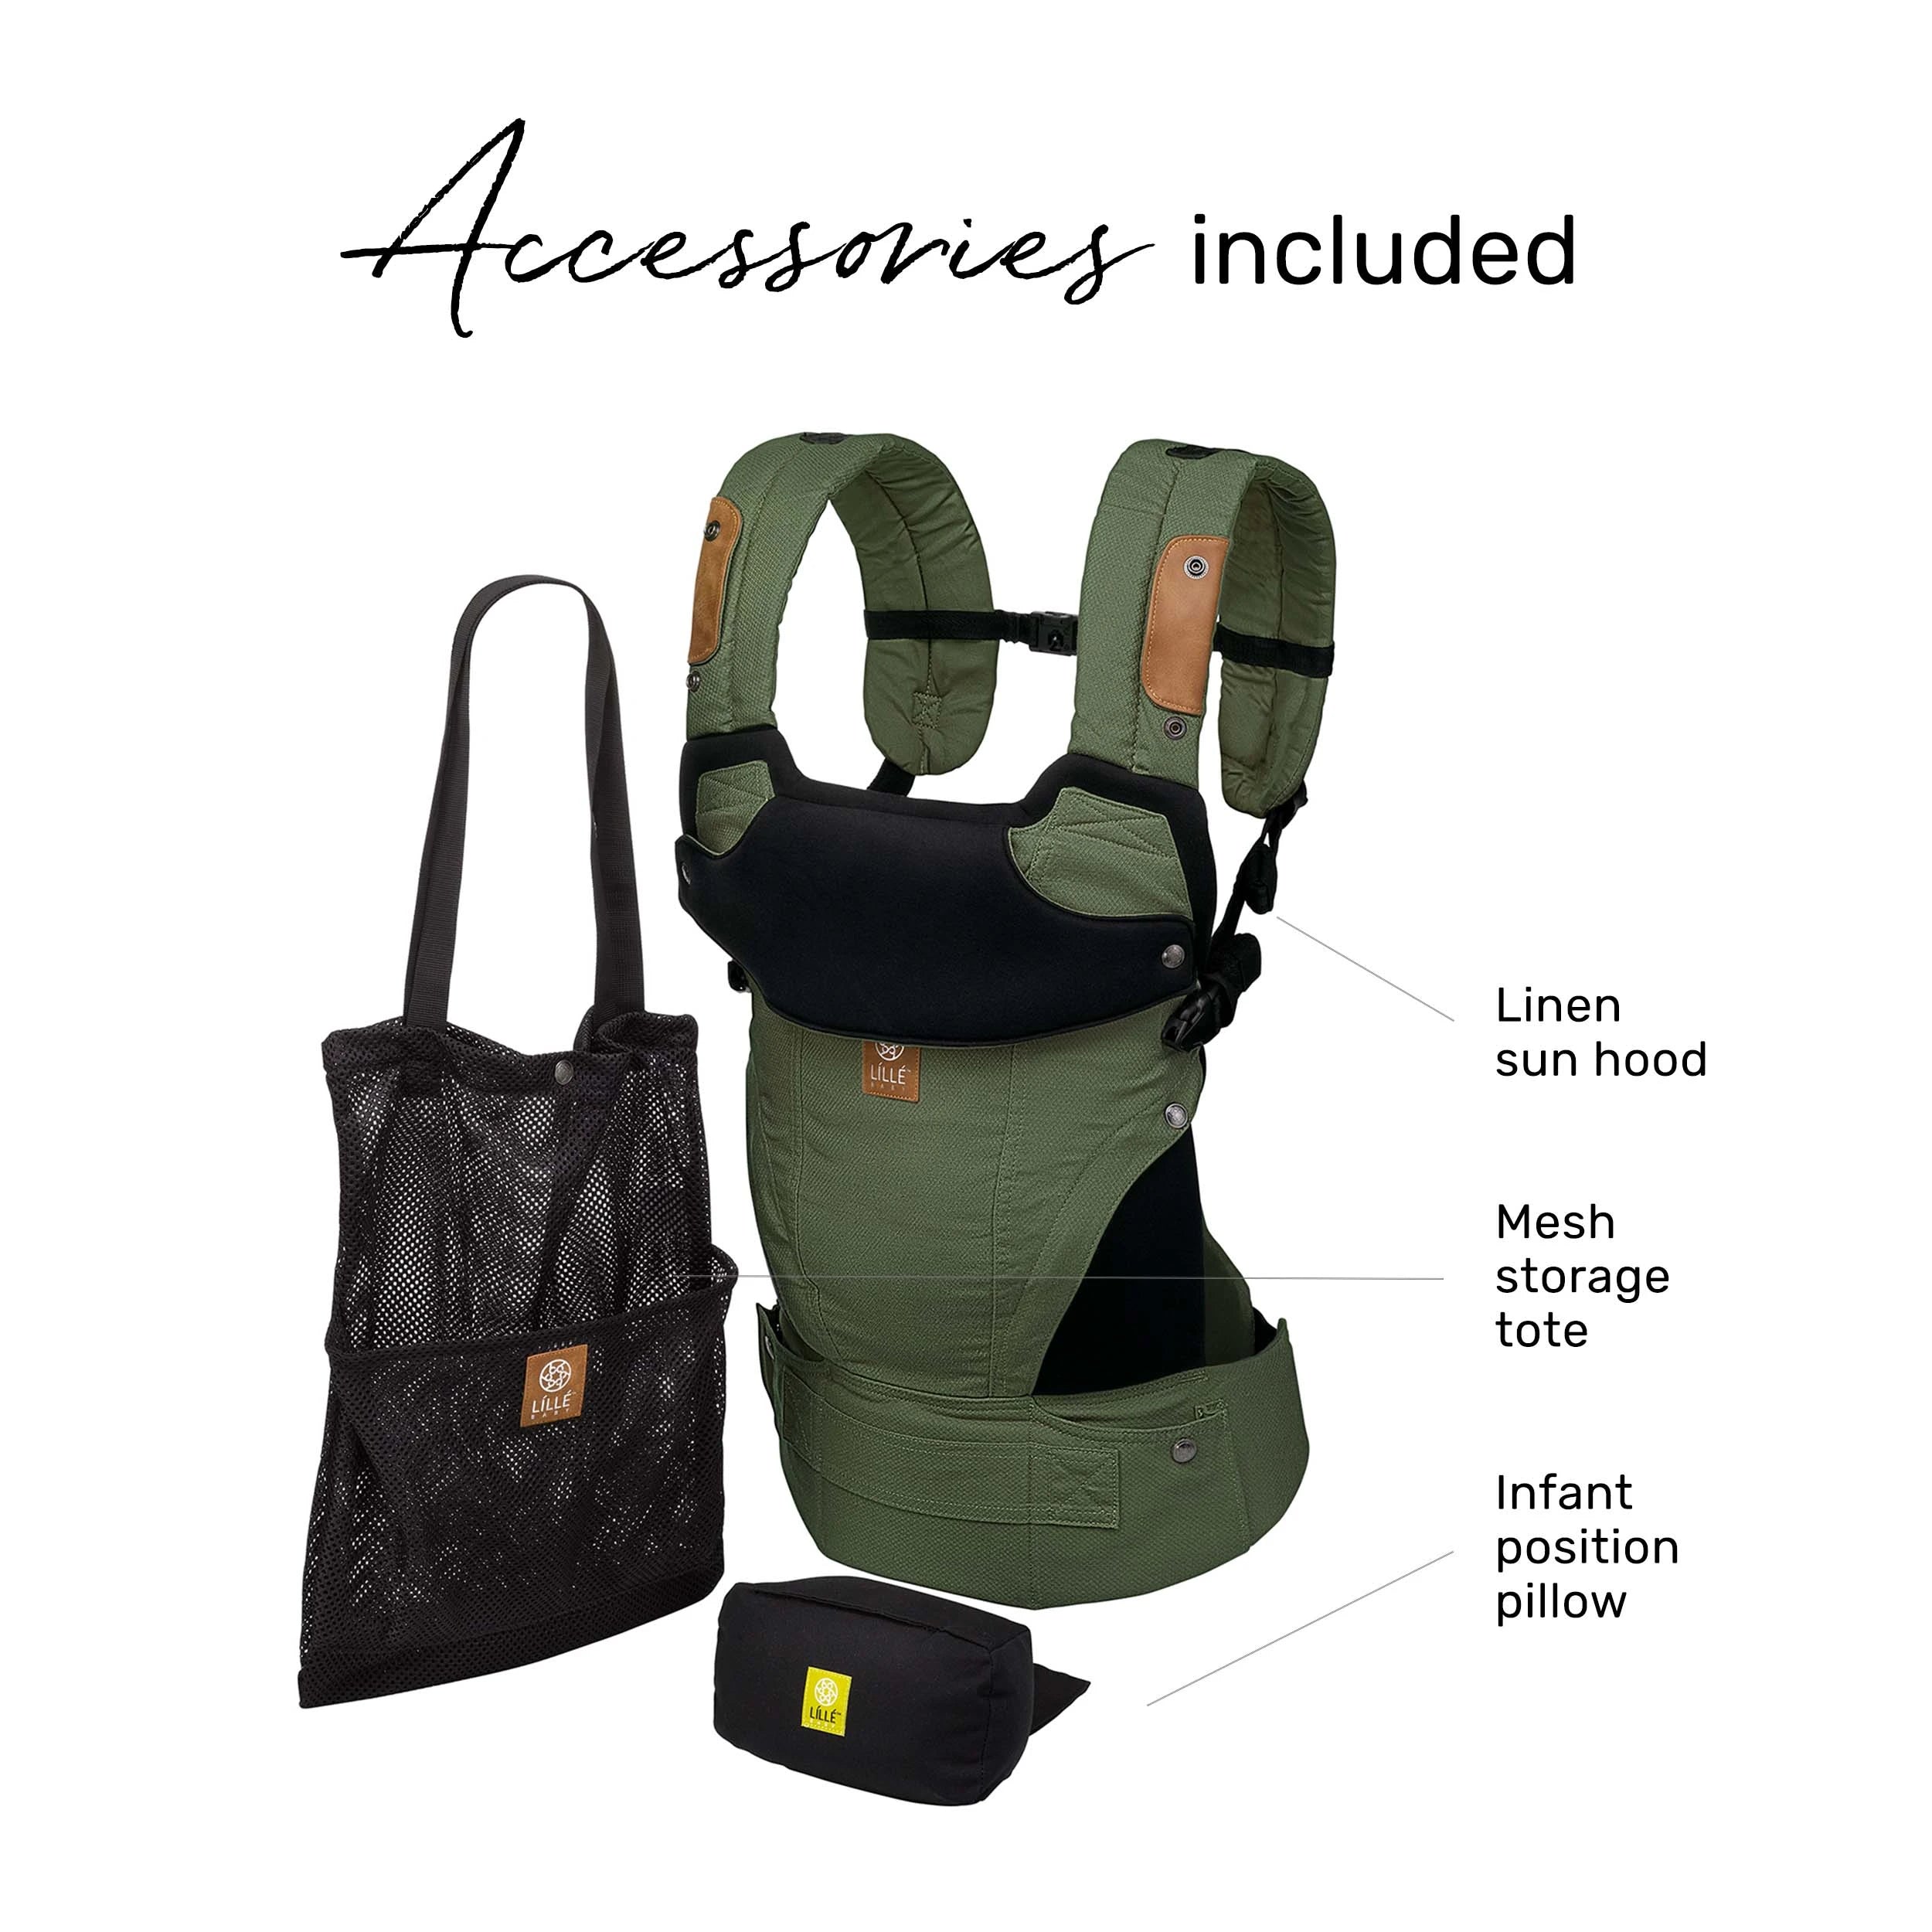 Elevate accessories included with purchase of a carrier. Pictured carrier, linen sun hood, mesh storage tote and infant position pillow.